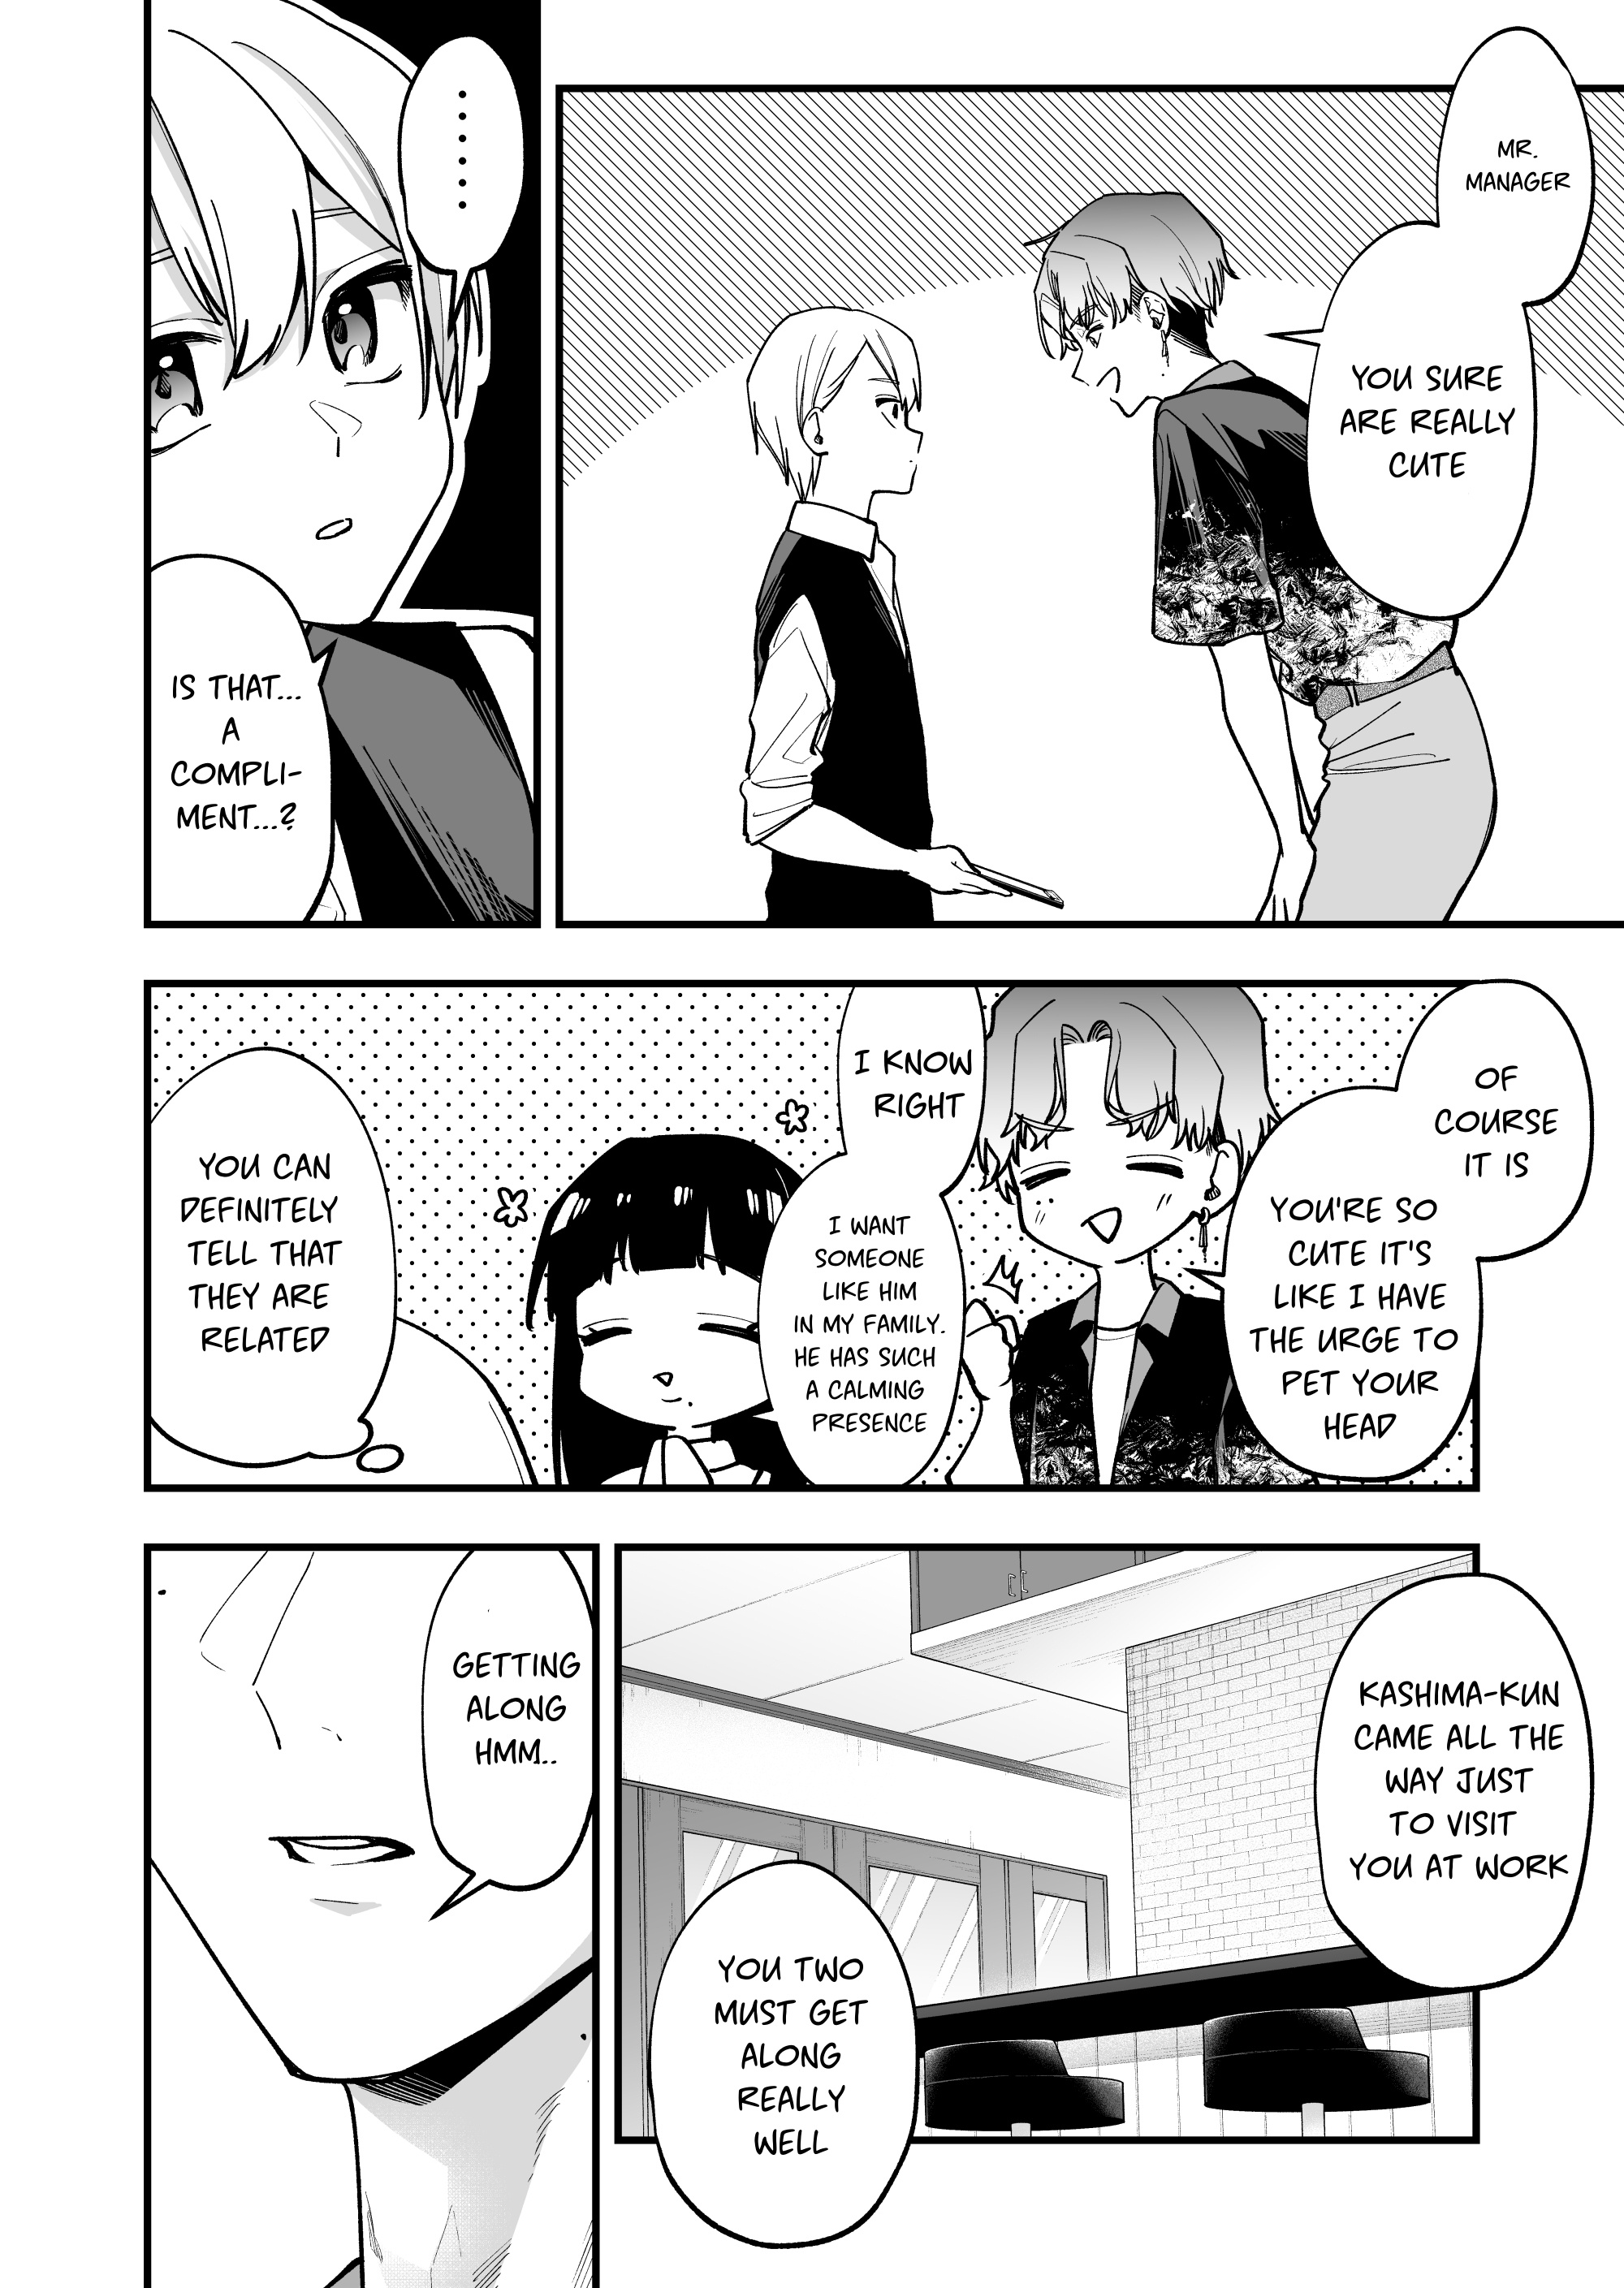 The Manager And The Oblivious Waitress - Page 2